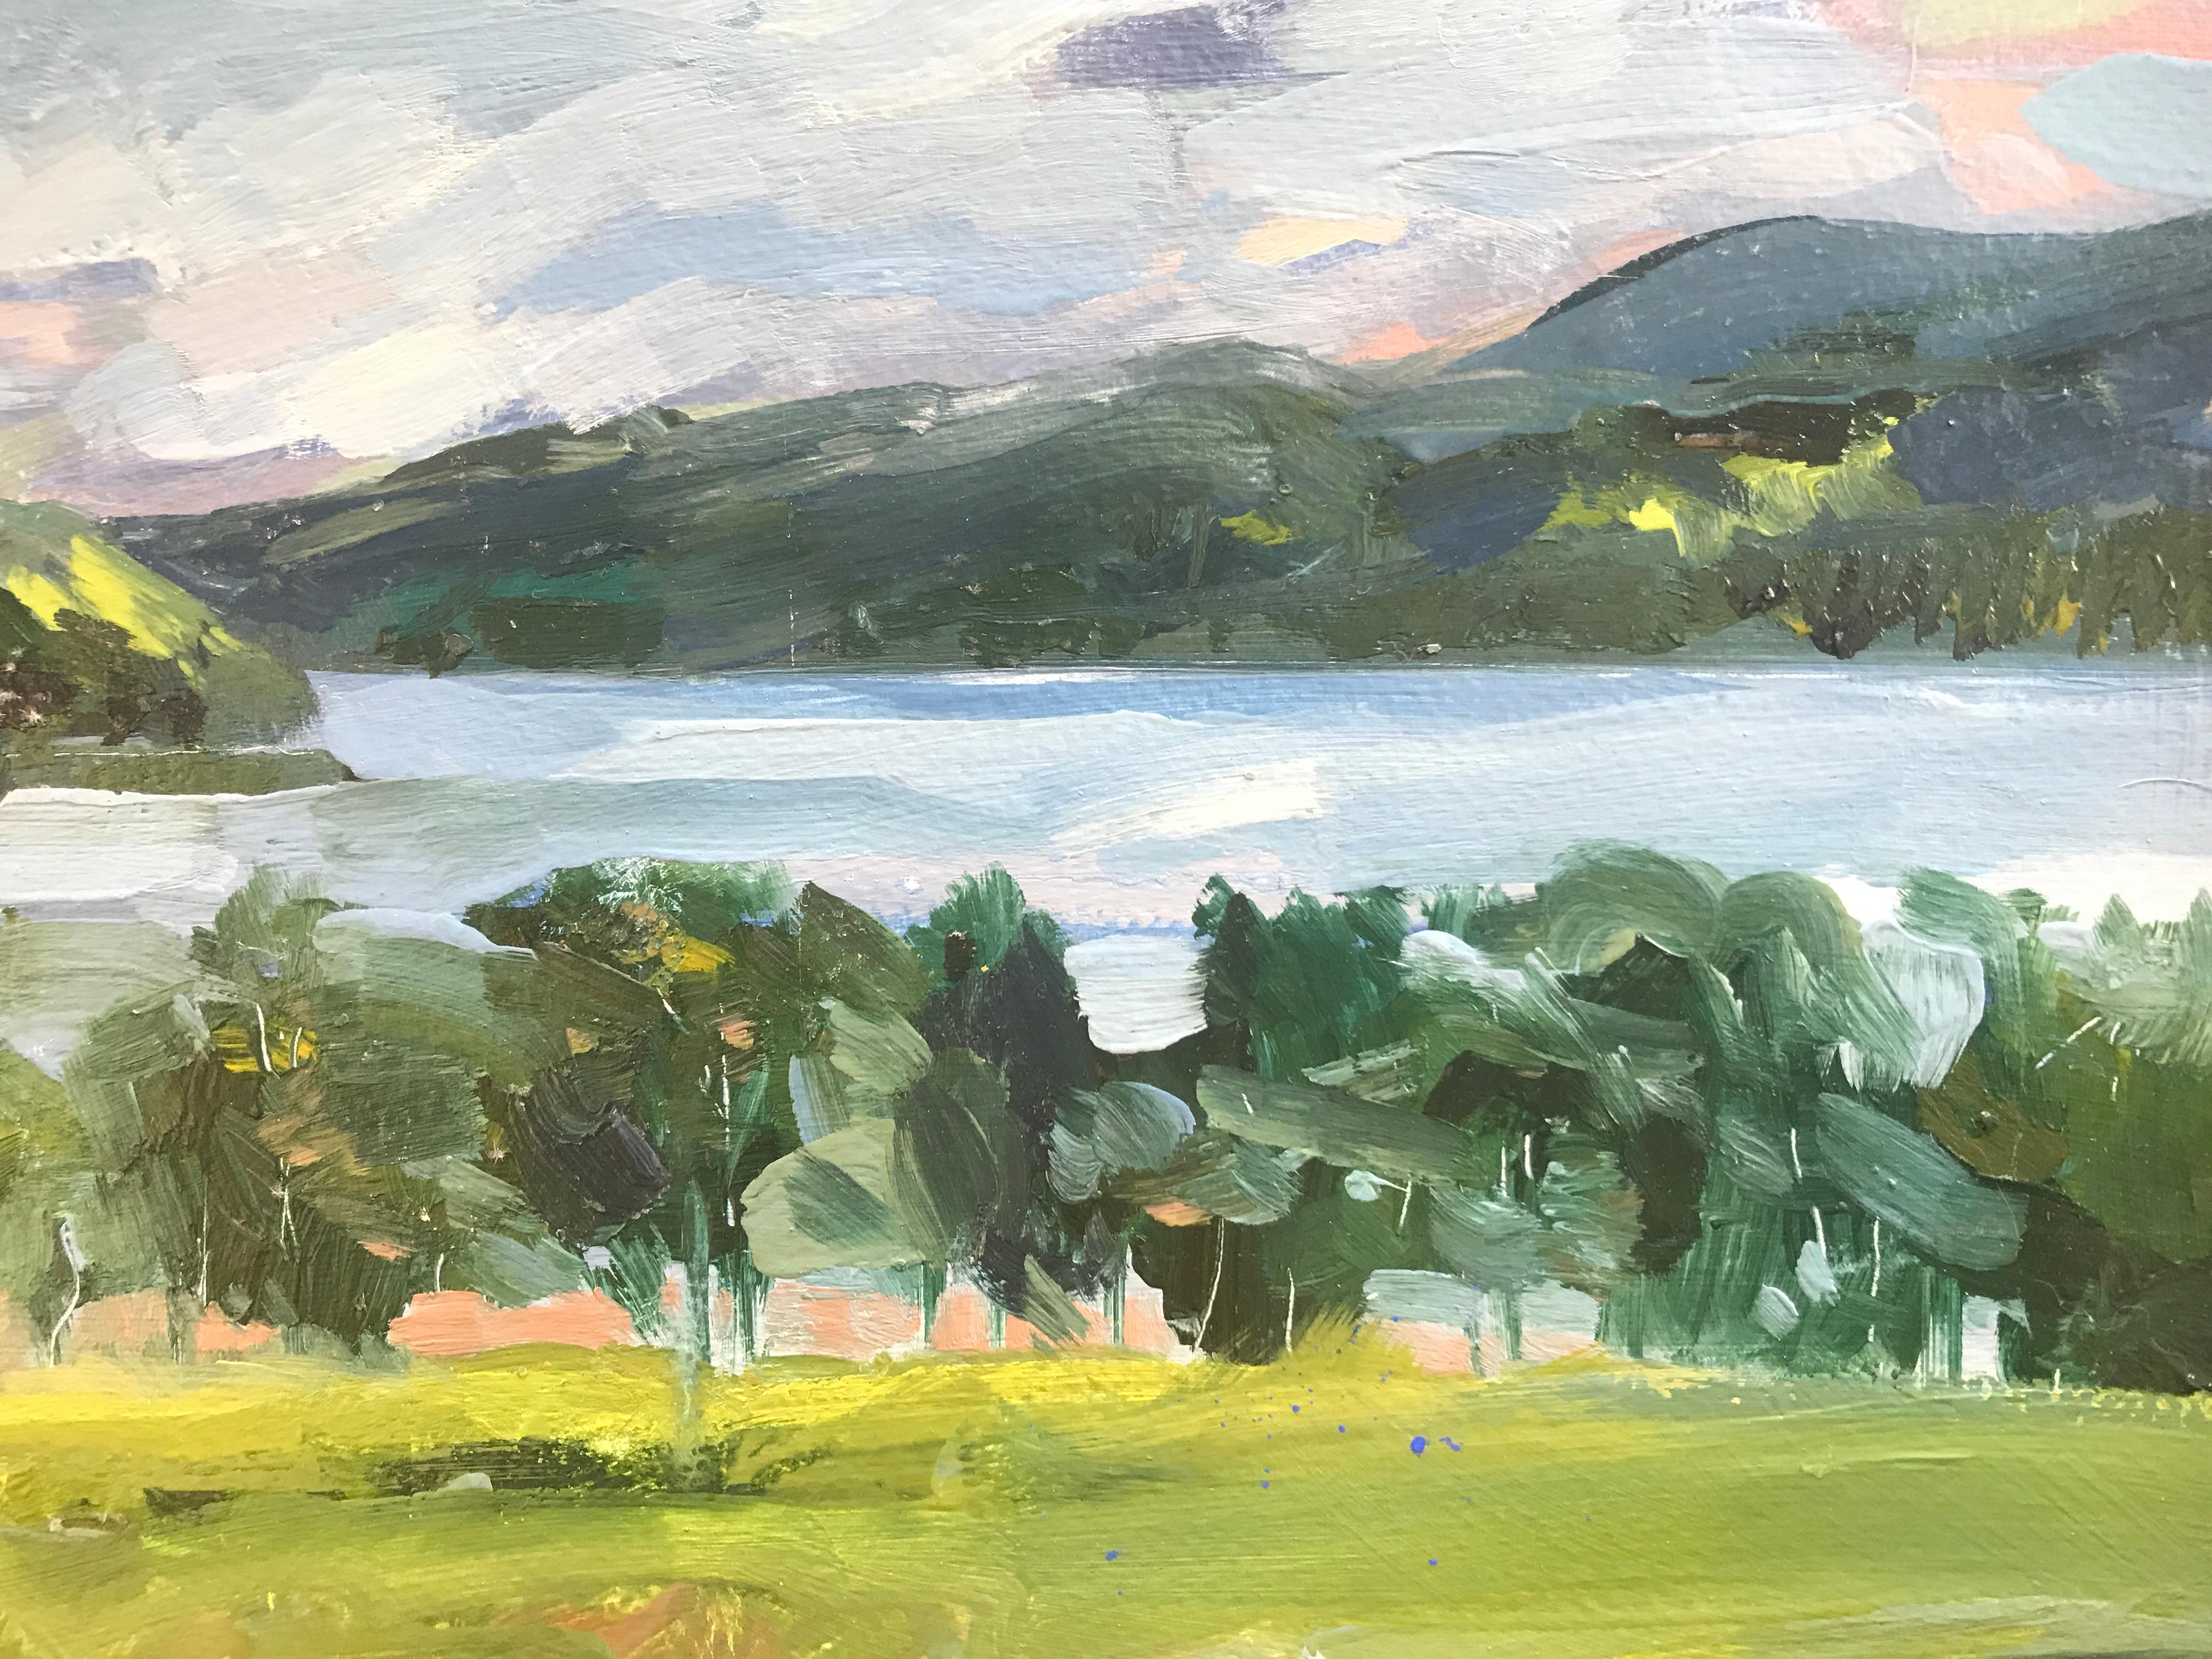 Still Day By The Loch, Scotland, Original painting, Landscape, Nature, Green art For Sale 6